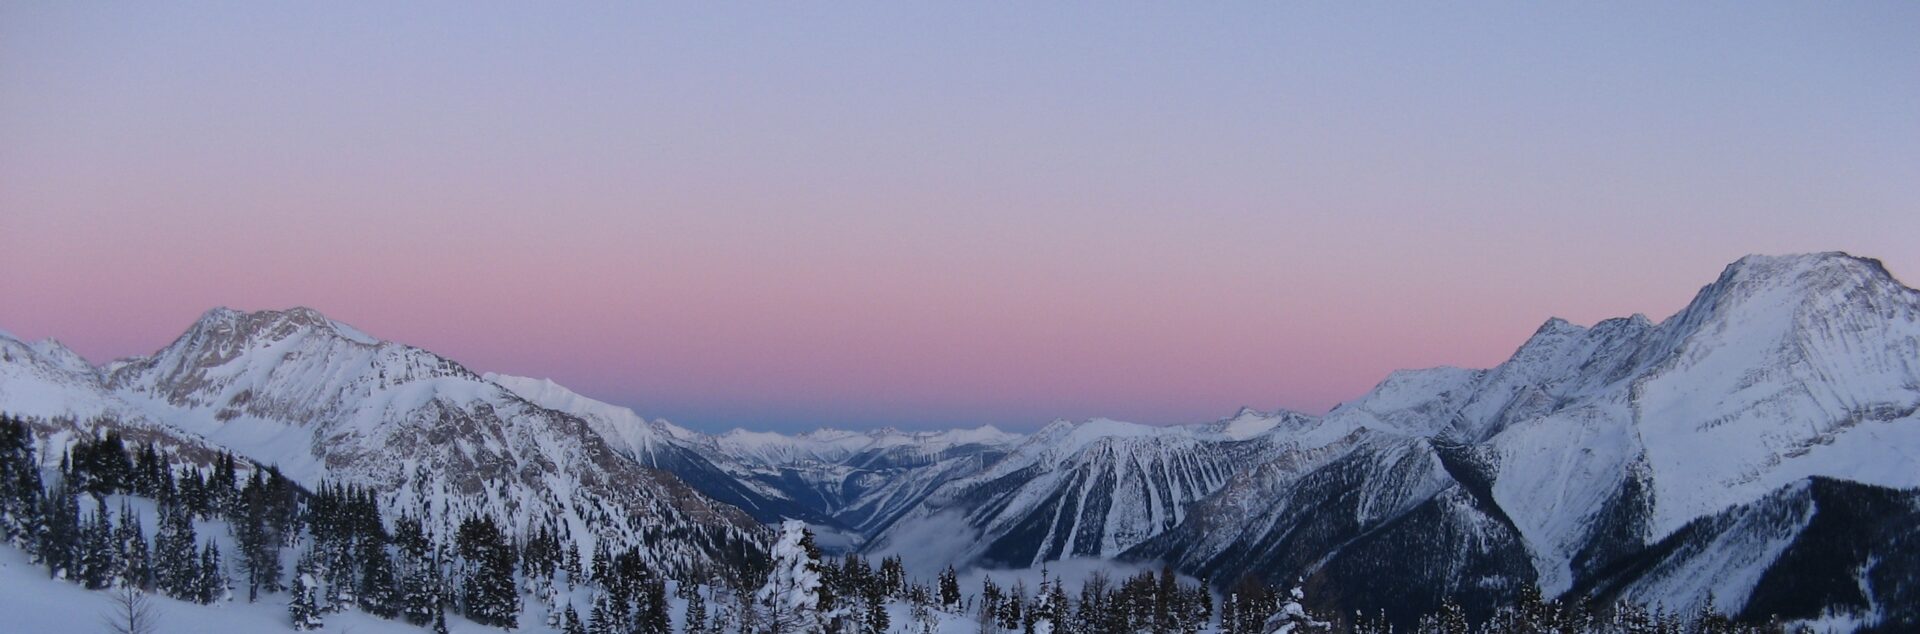 A landscape of large snow covered mountains at dusk.